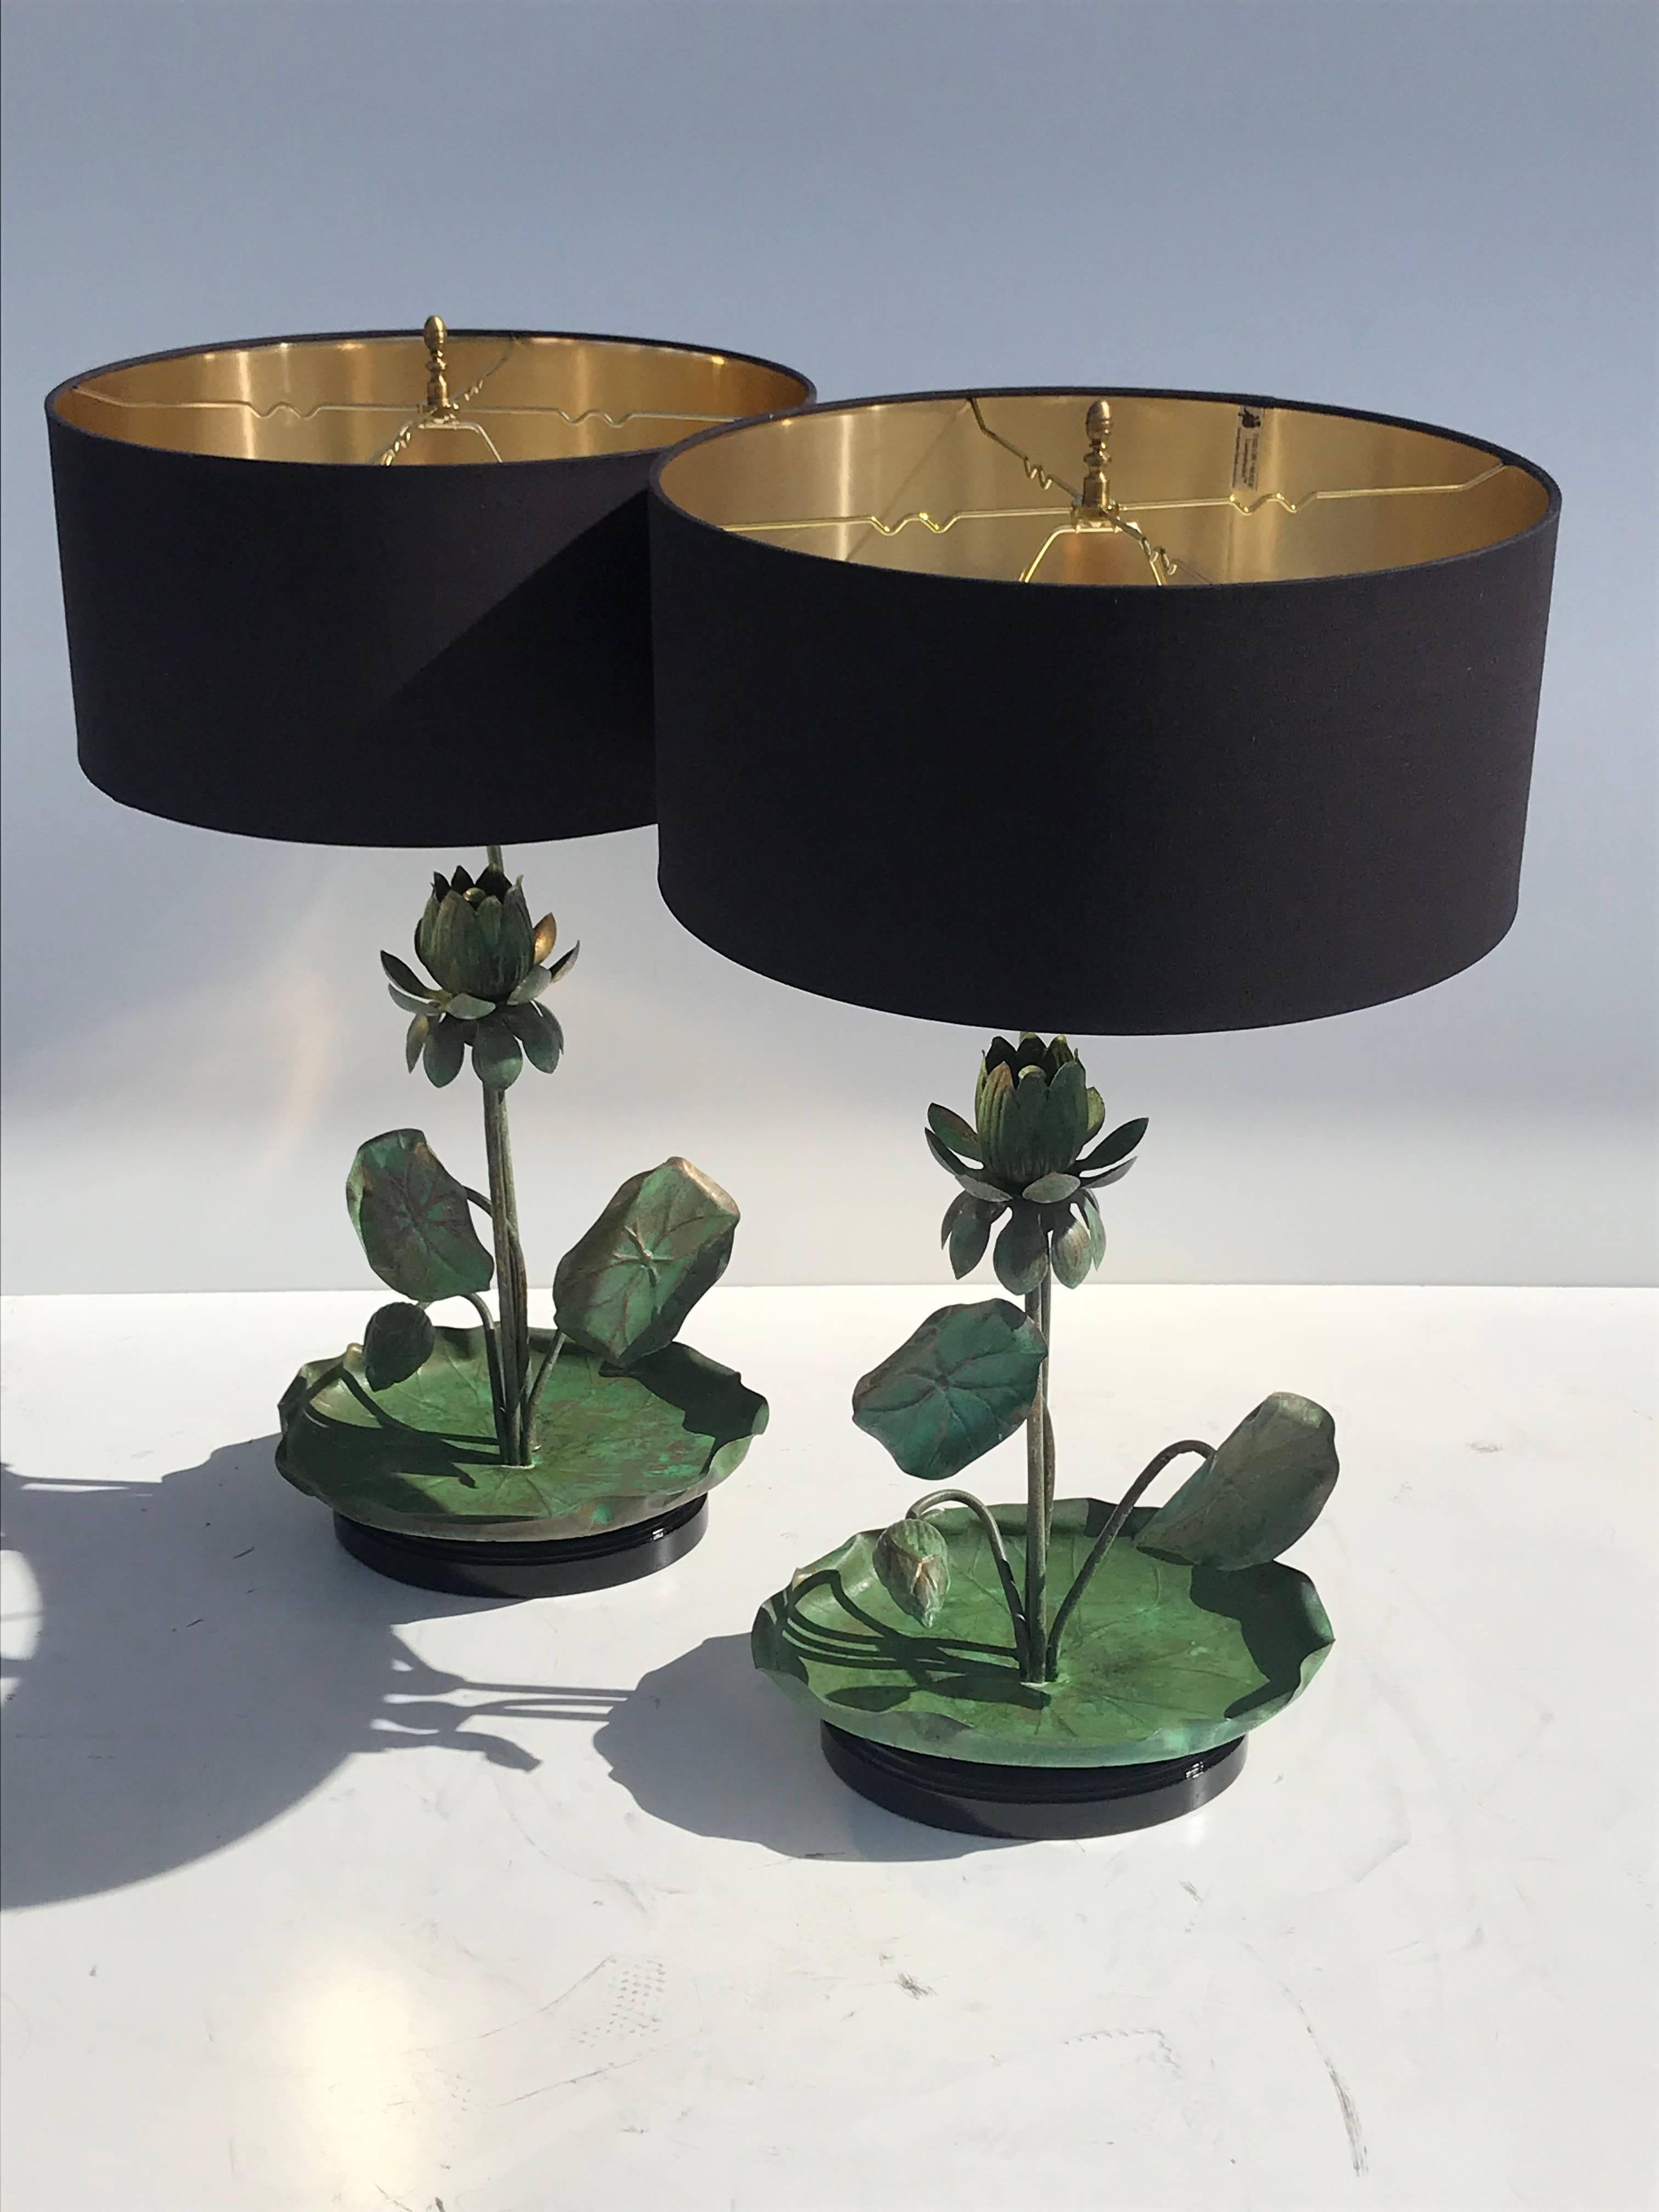 Pair of brass lotus lamps in verdigris patina. Lampshades are extra $150 each and are 18